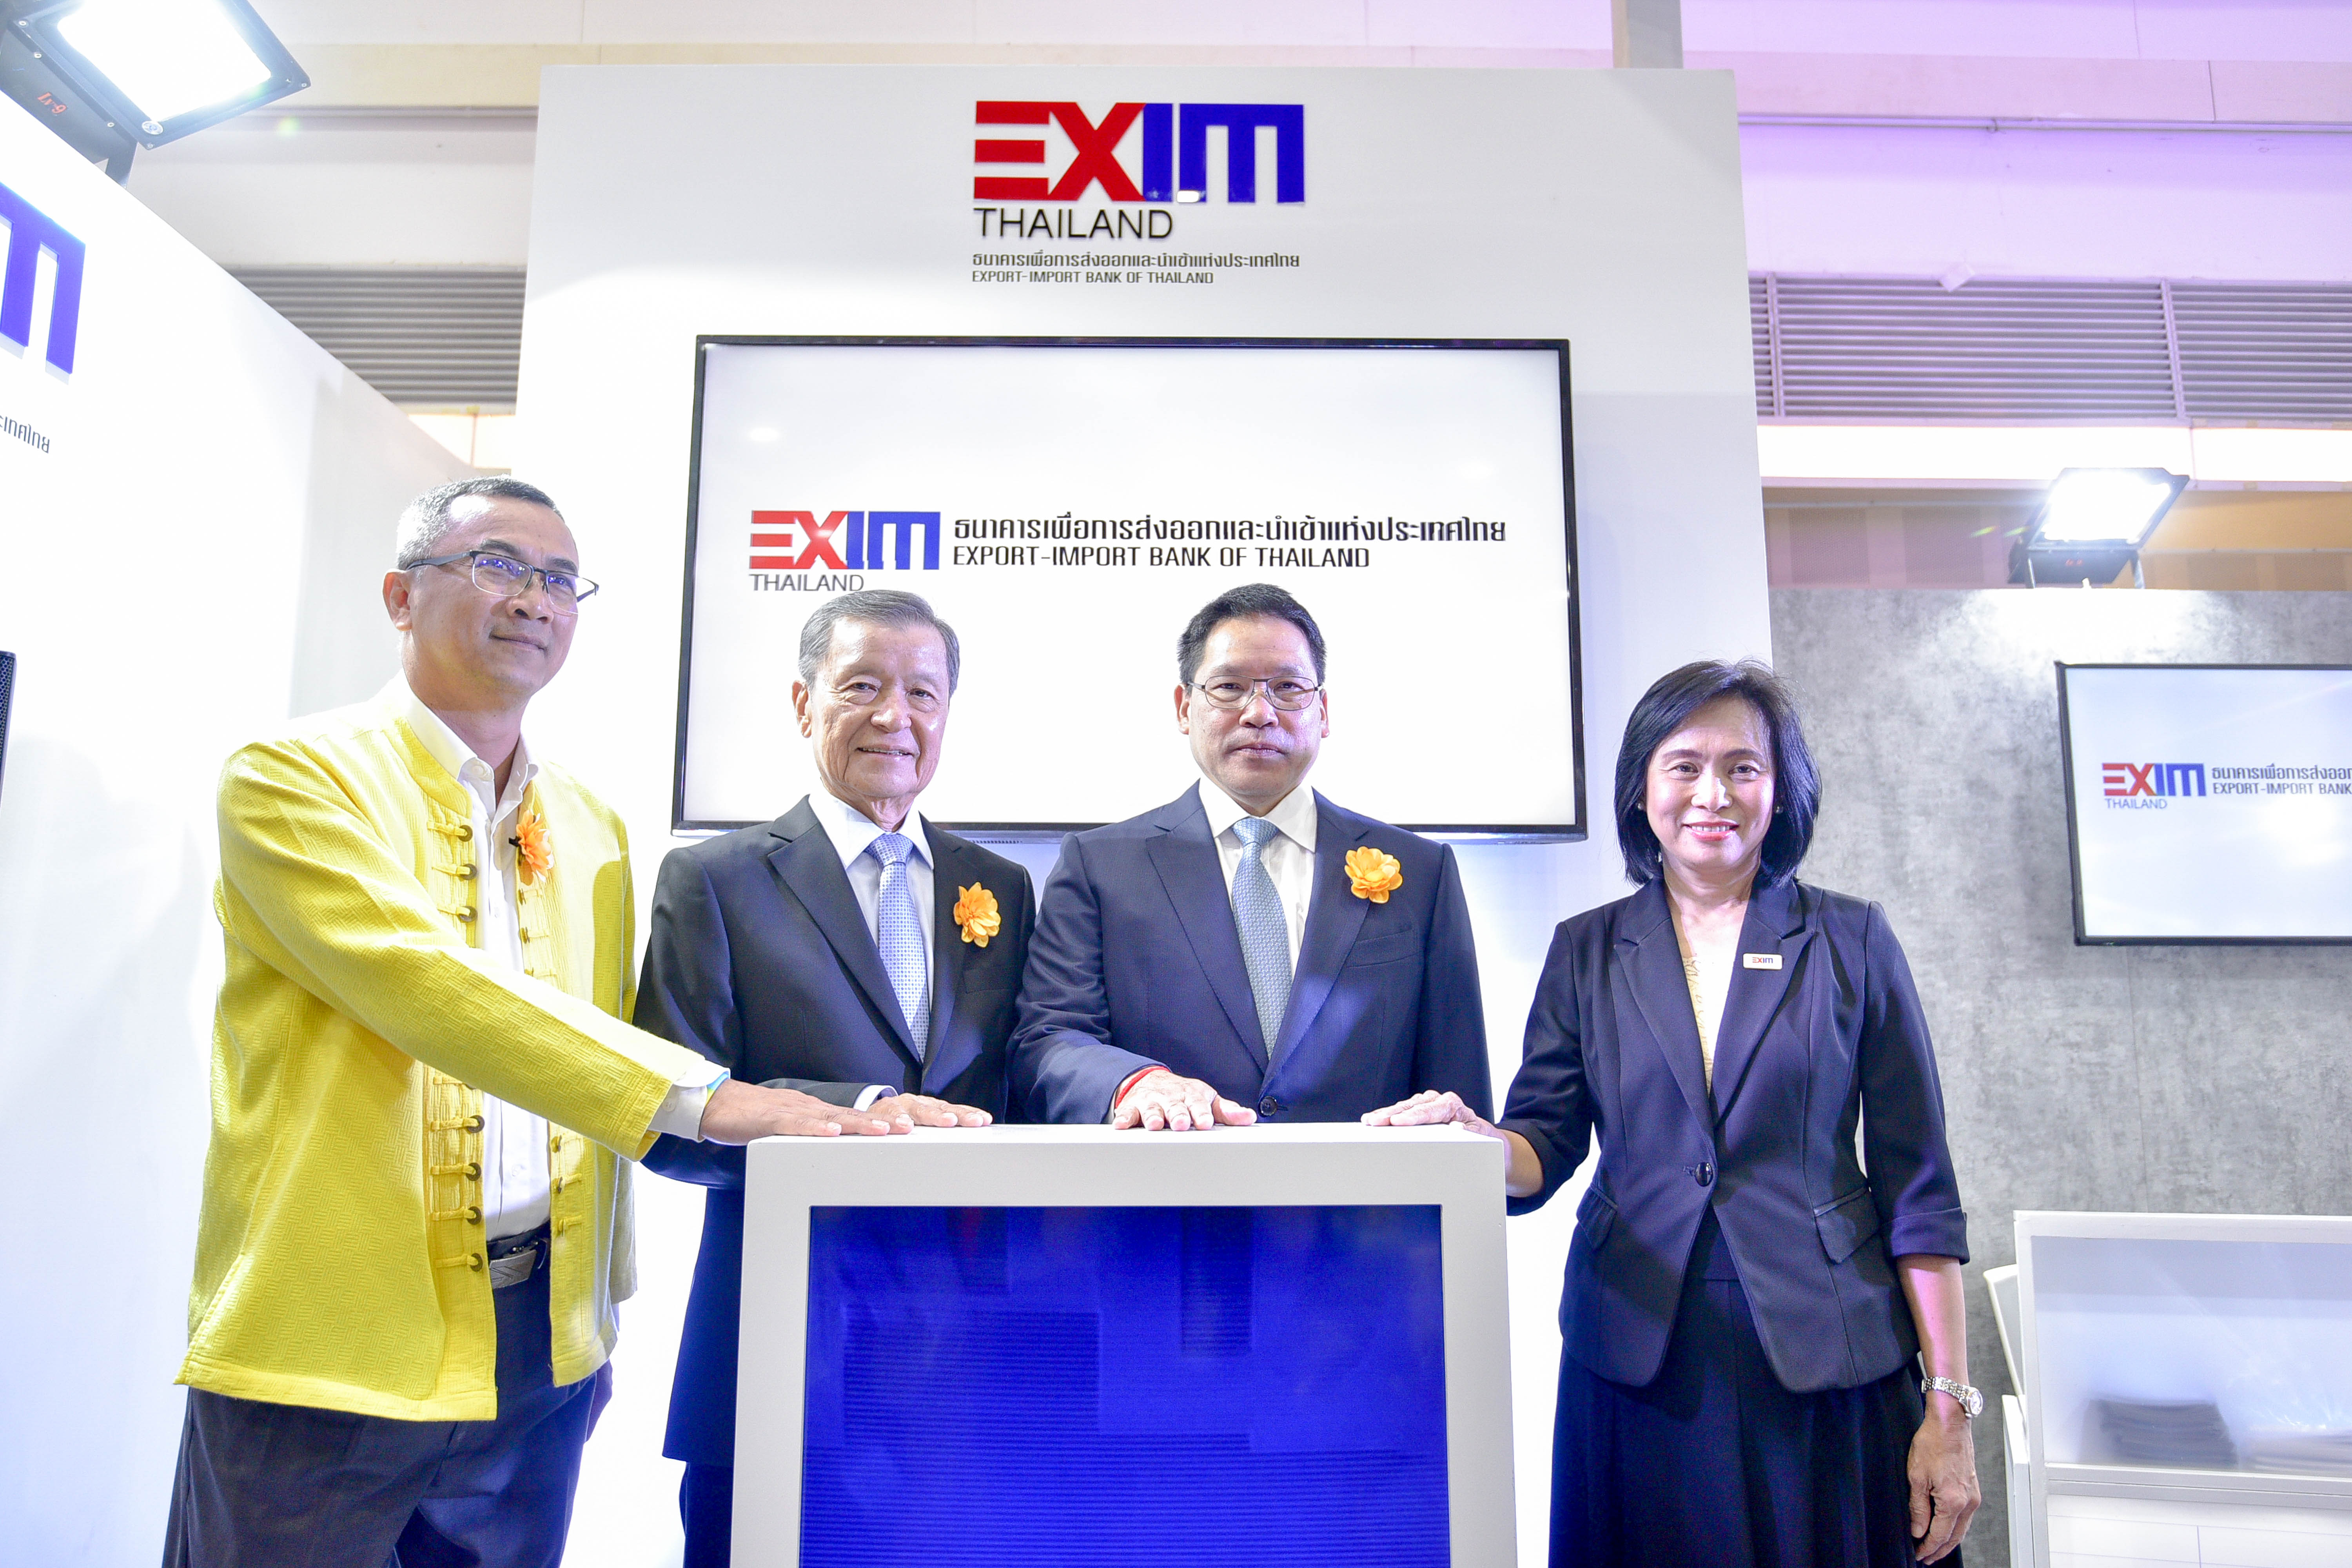 EXIM Thailand Opens Booth at Money Expo Chiangmai 2019